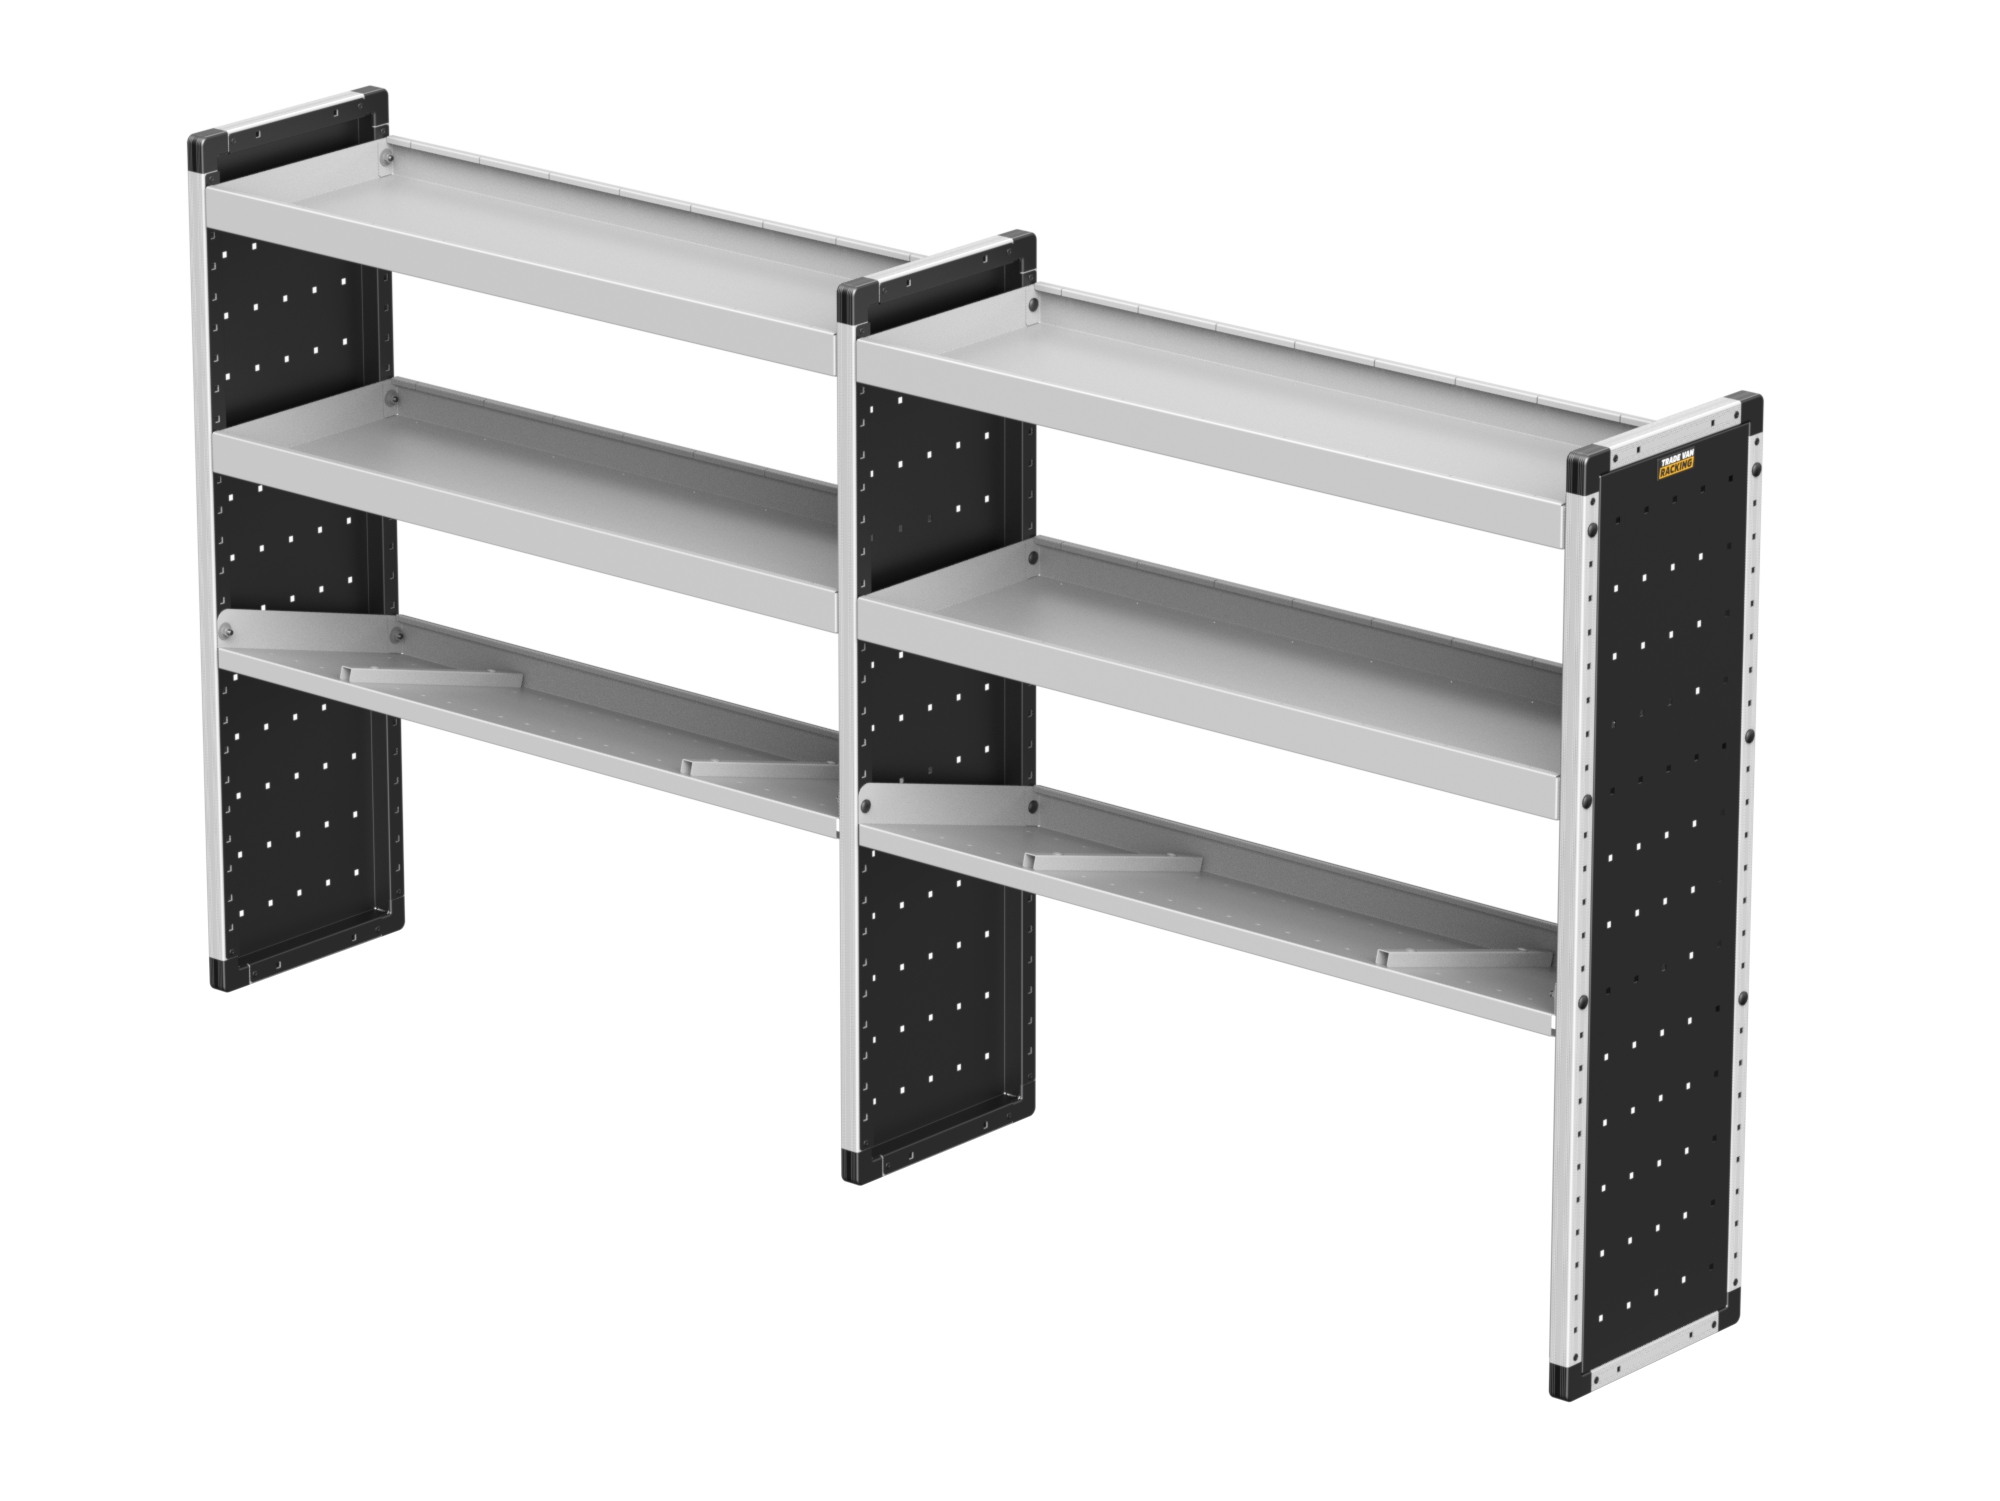 Trade Van Racking - Double Unit - 2 straight & 1 angled per bay - TVR-DBL-012